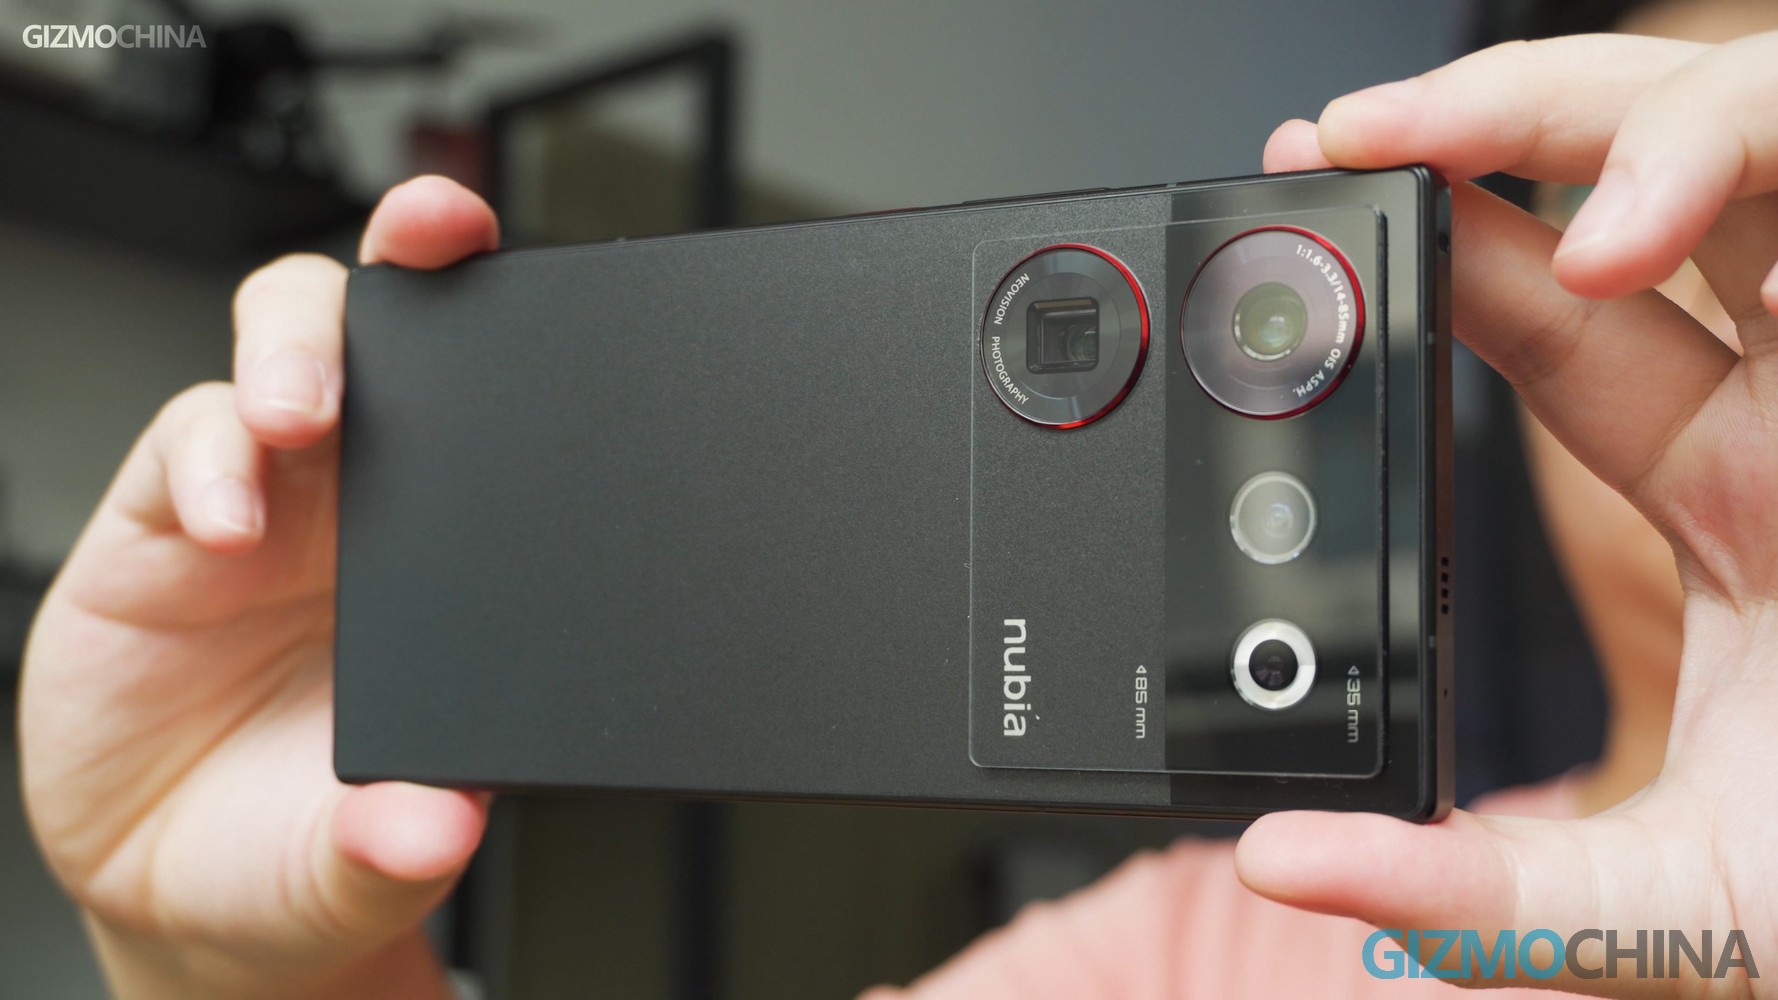 The Nubia Z50 Ultra gives new meaning to notchless displays, but